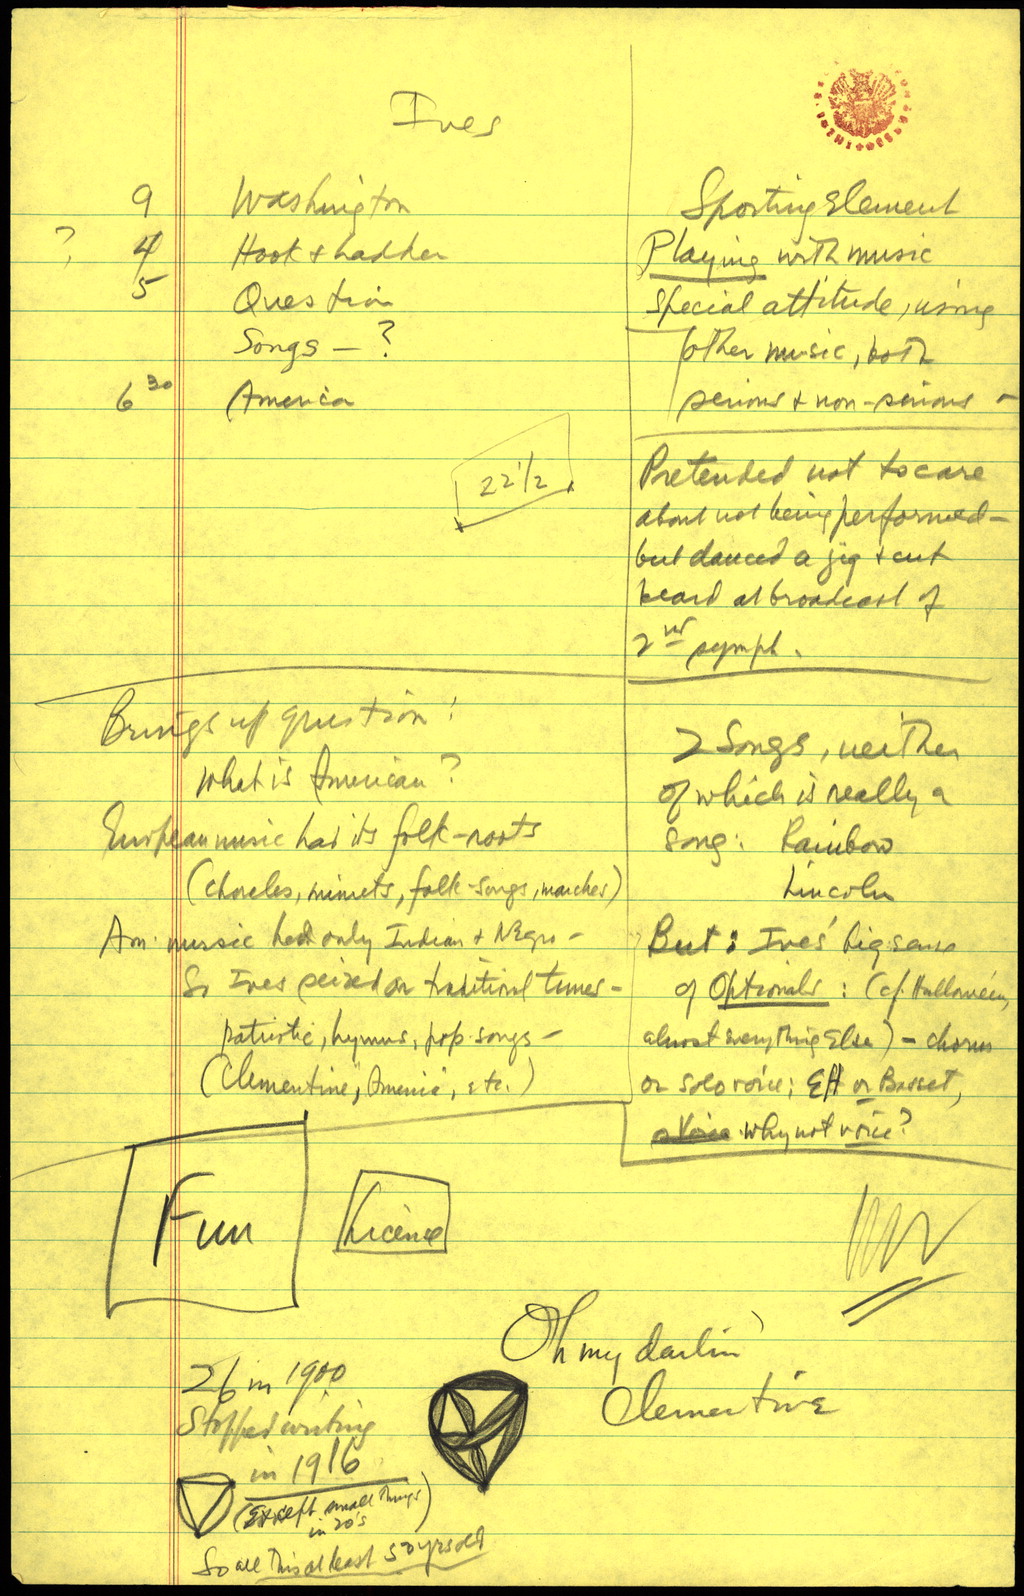 Young People's Concerts Scripts: Charles Ives: American Pioneer, pencil on yellow legal pad paper; notes (Credit: Library of Congress, Music Division)